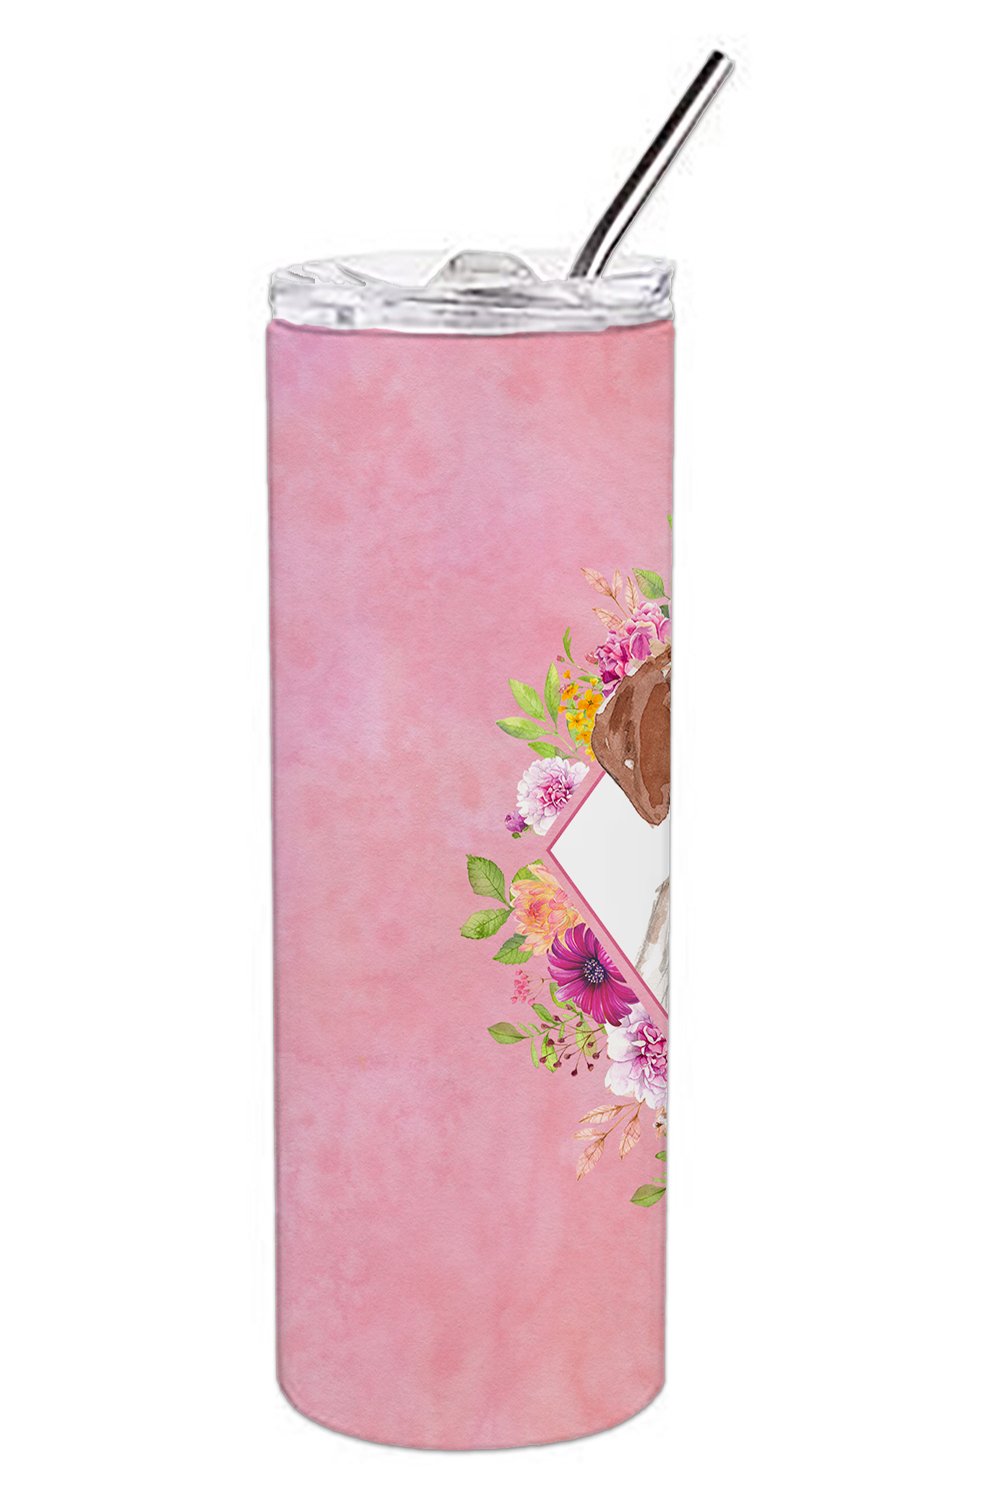 Brittany Spaniel Pink Flowers Double Walled Stainless Steel 20 oz Skinny Tumbler CK4254TBL20 by Caroline's Treasures